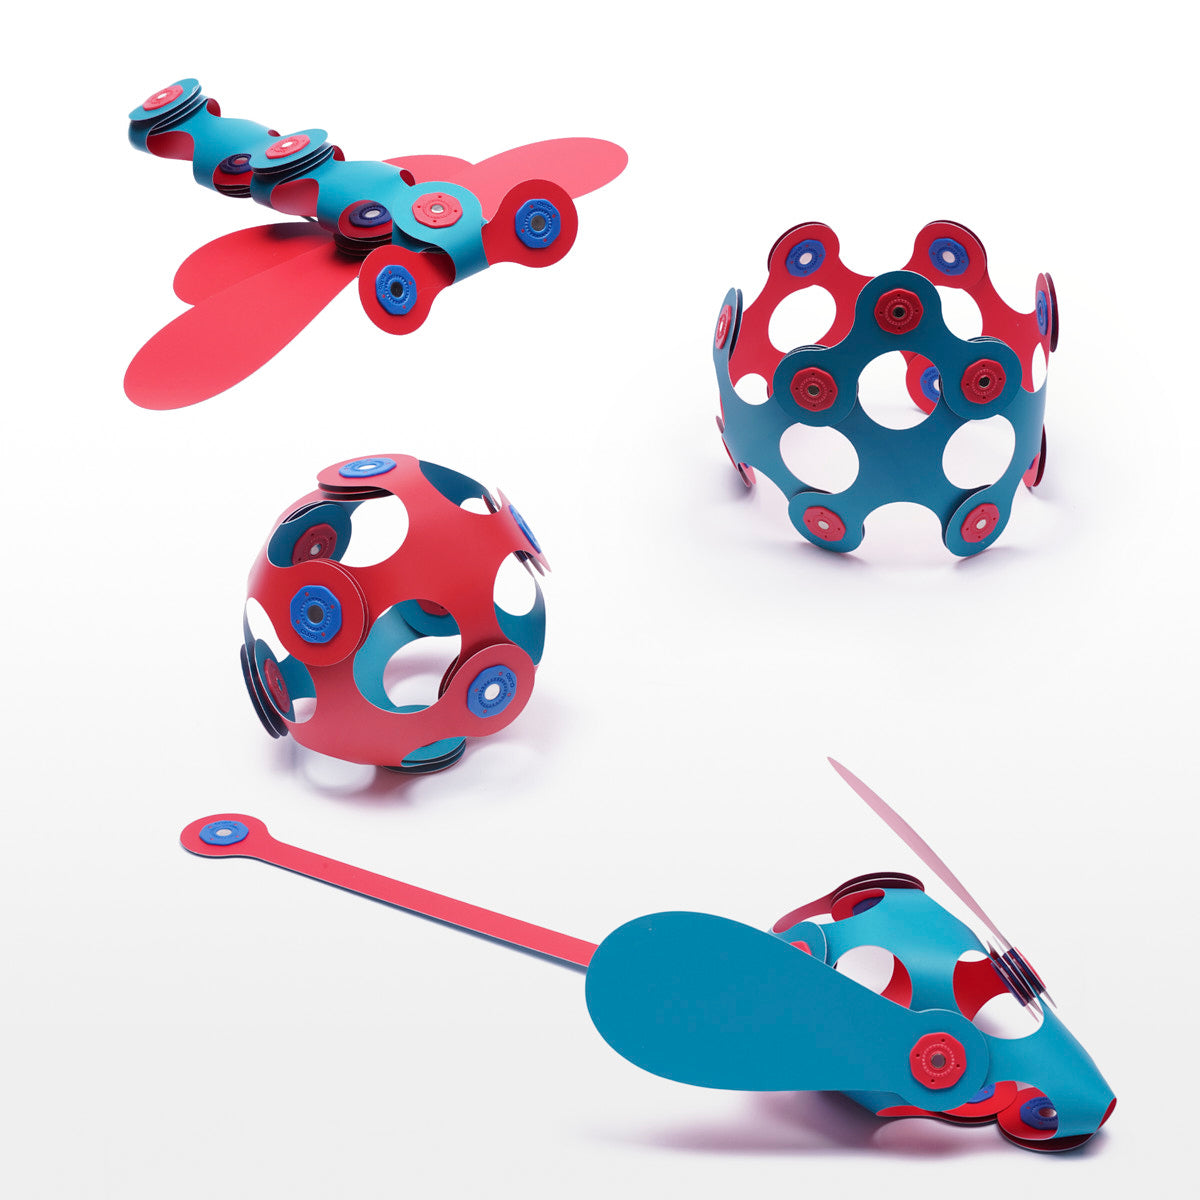 Clixo - Itsy Pack - Flamingo / Turquoise - Magnetic Building